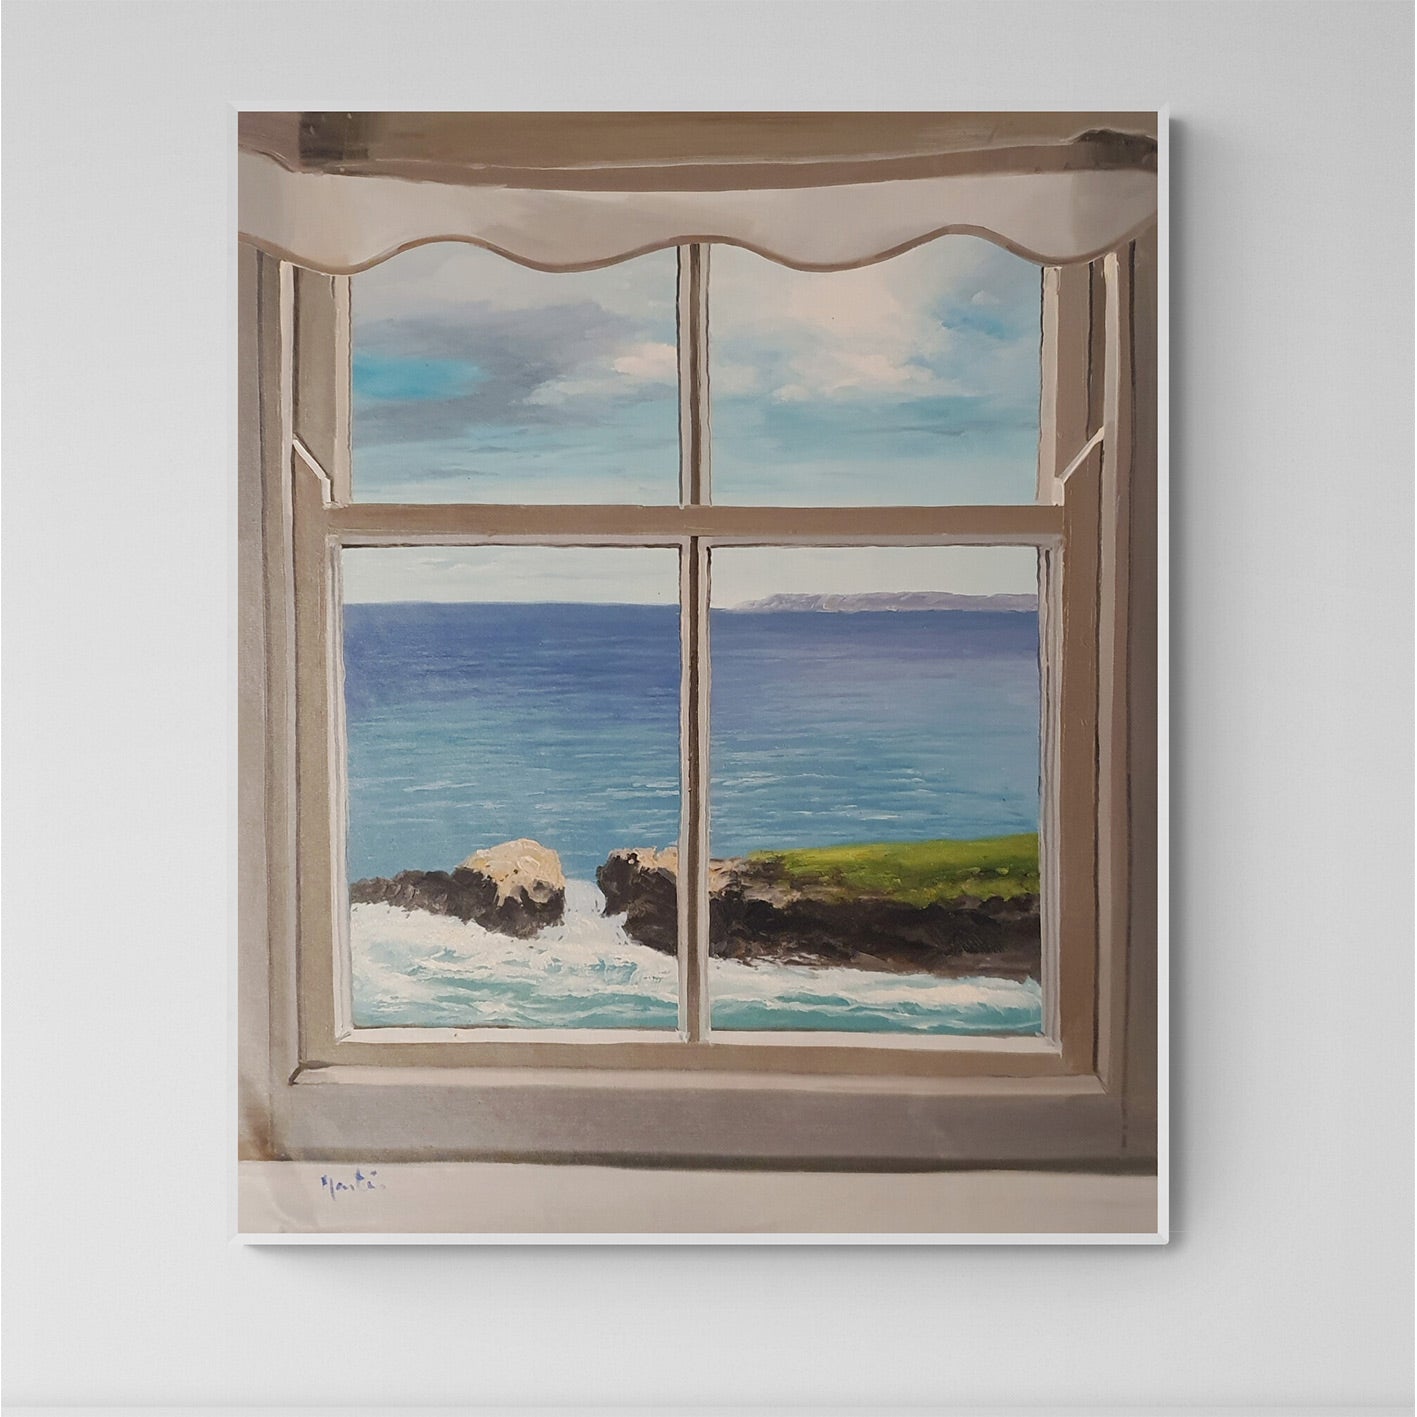 Sea and Rock Window Painting